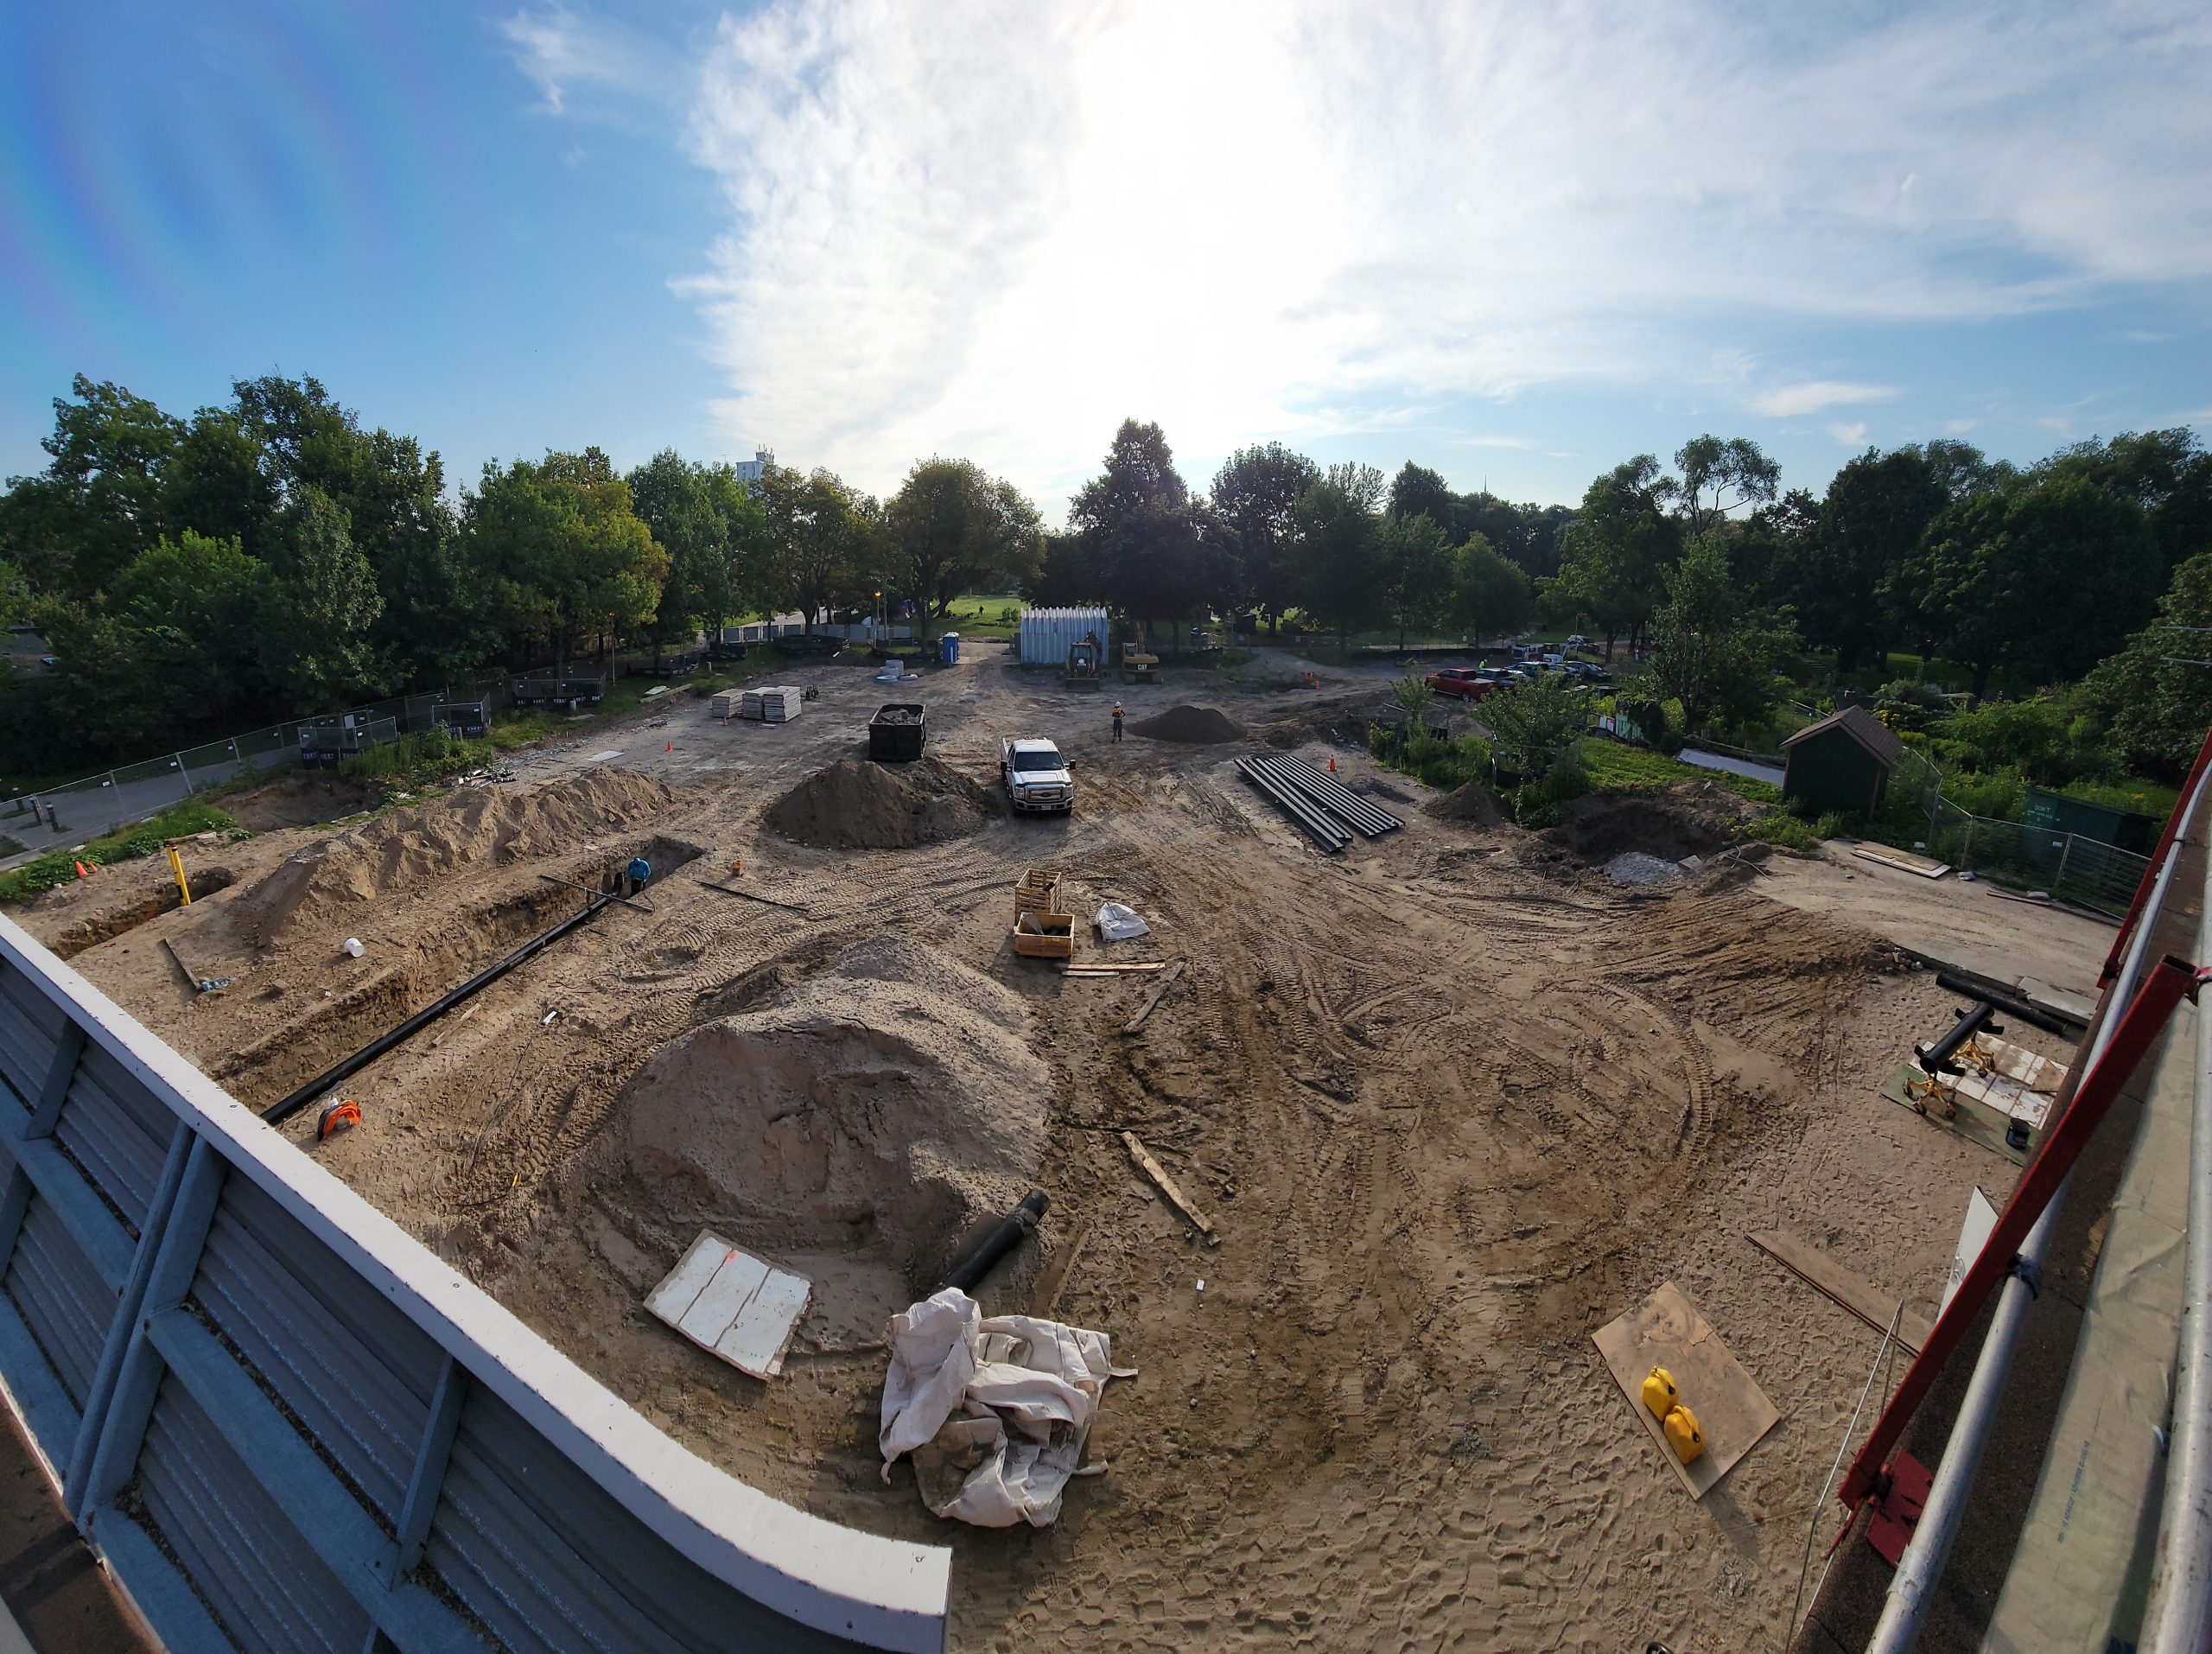 Photo shows the exterior construction site, from the roof of the Dufferin Grove Clubhouse, looking east over the old ice rink area and green space. The constructions site is mostly dirt and piles of gravel, with one worker in a dug-out trench, working with black piping. Wood, piping, and other construction debris are scattered around the site. A white pickup truck is parked in the middle of the site.